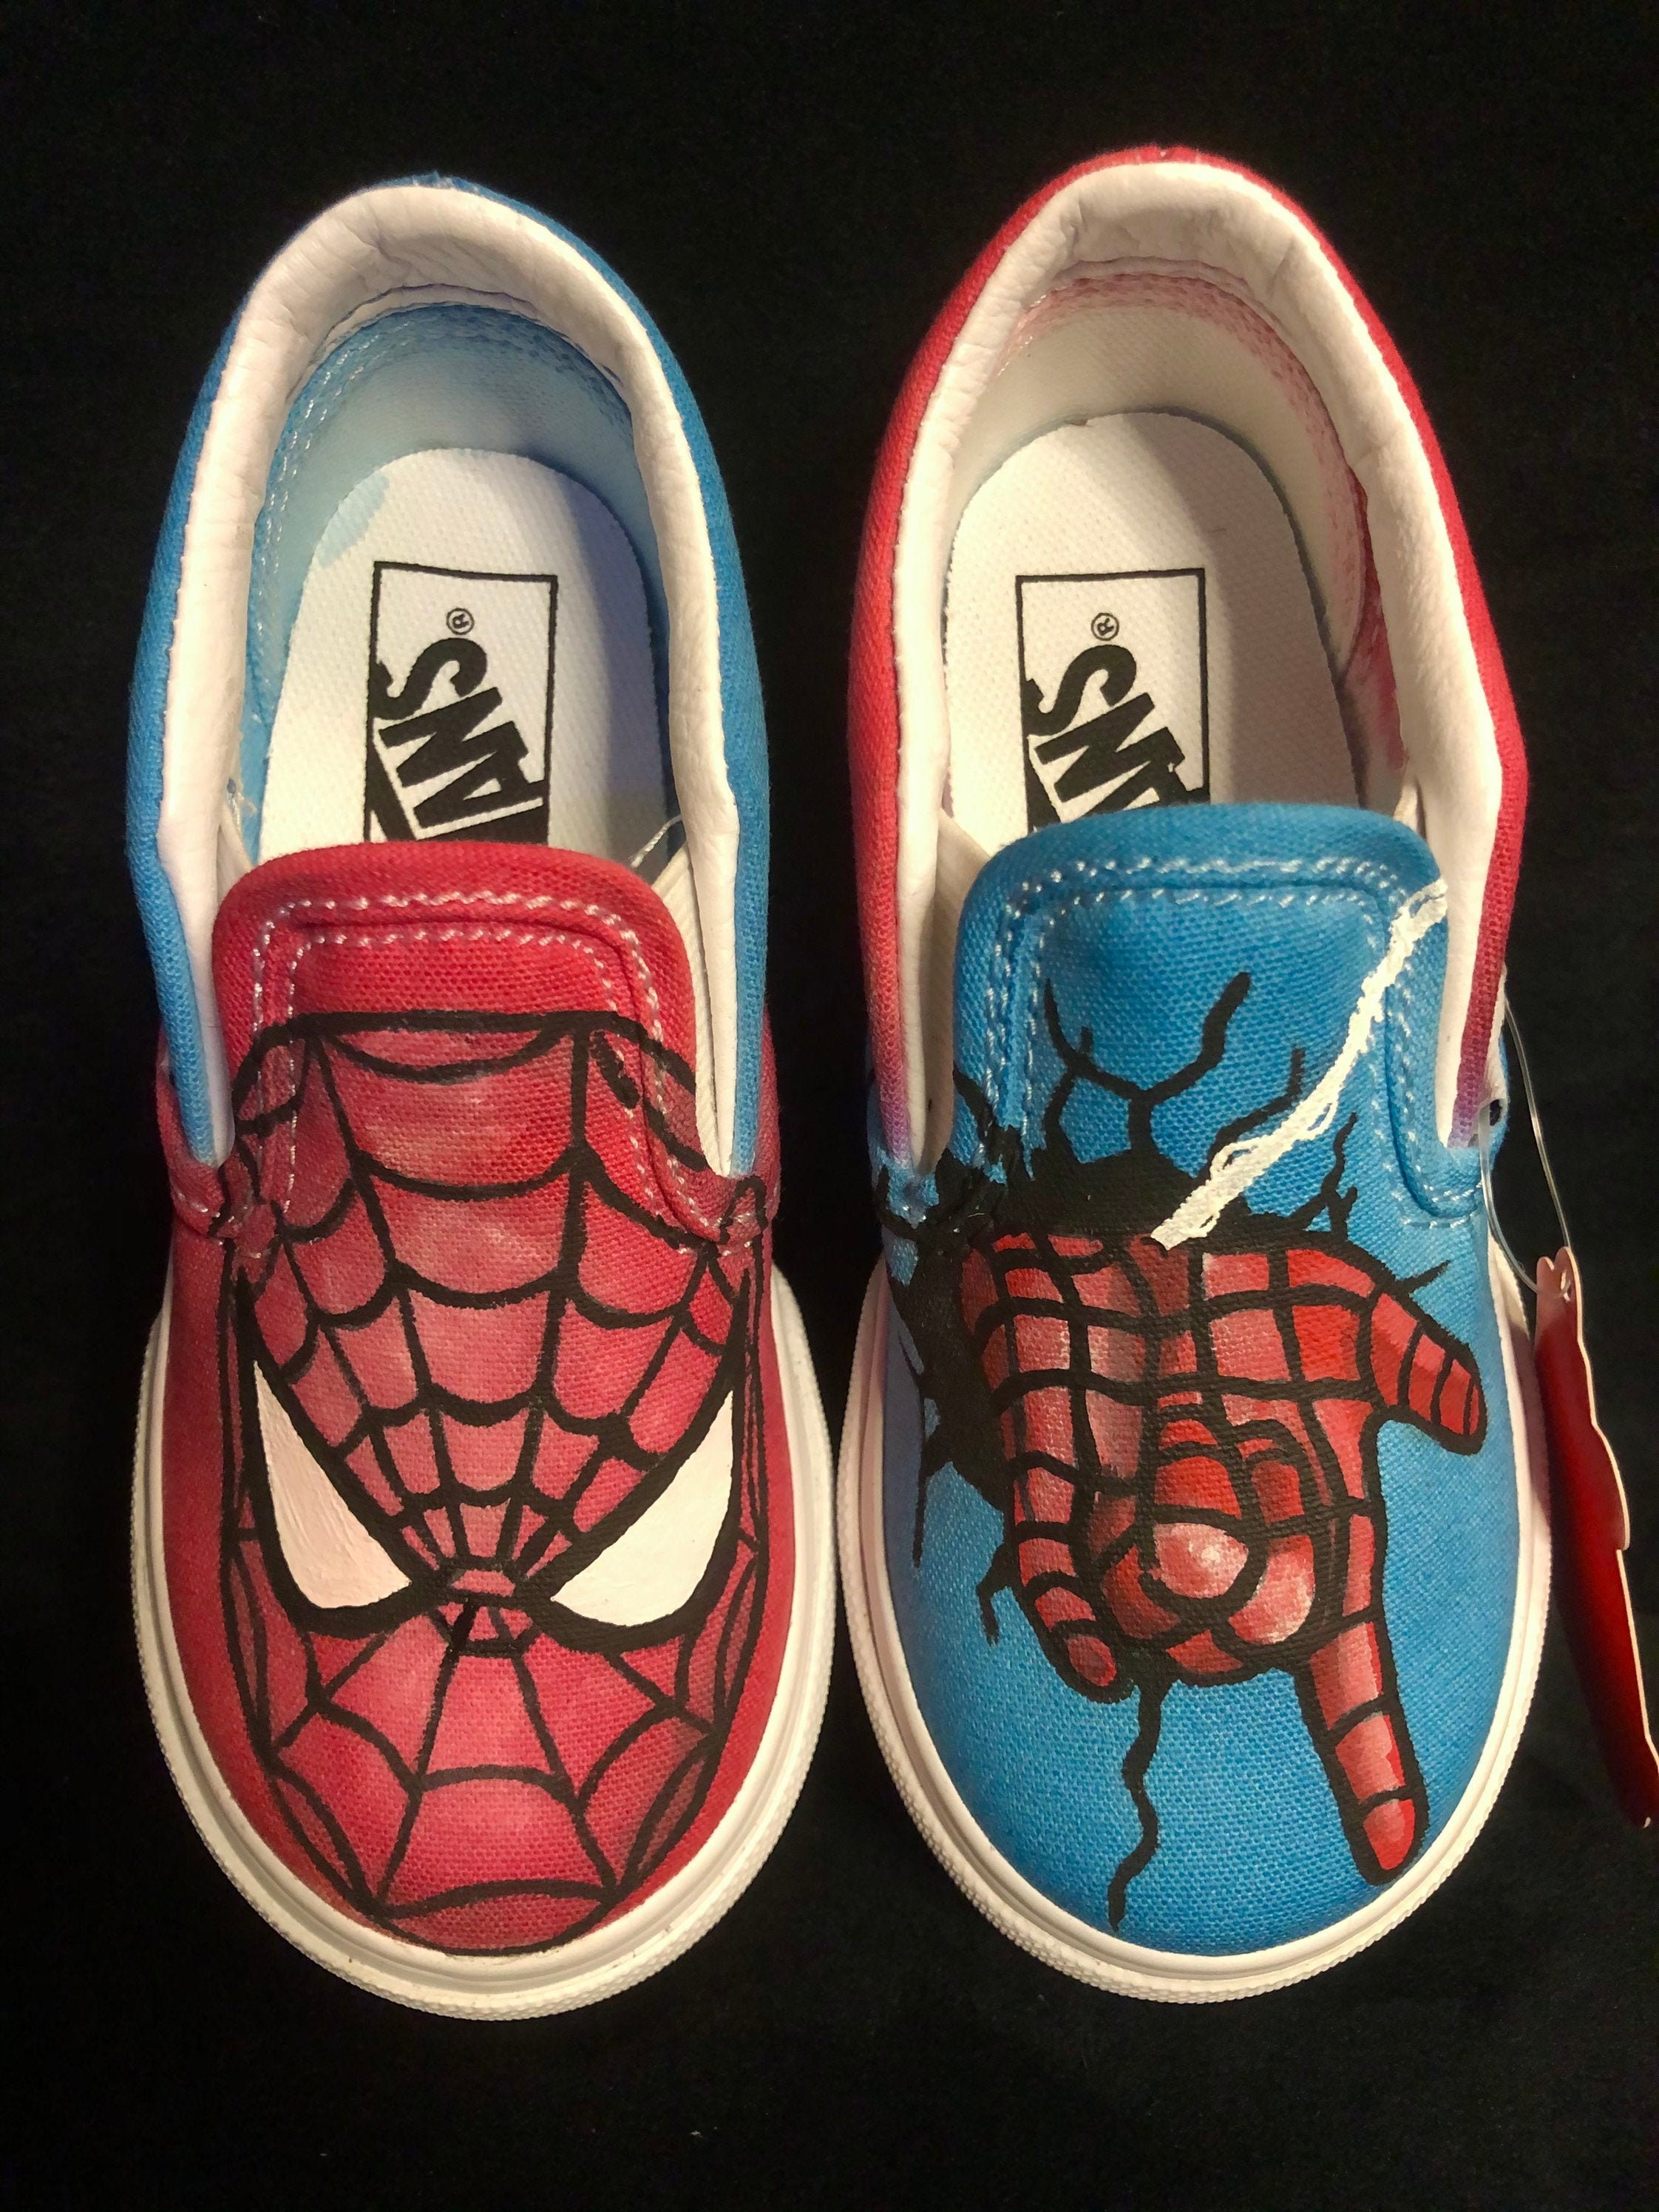 Spider-man Themed Painted Kids Etsy